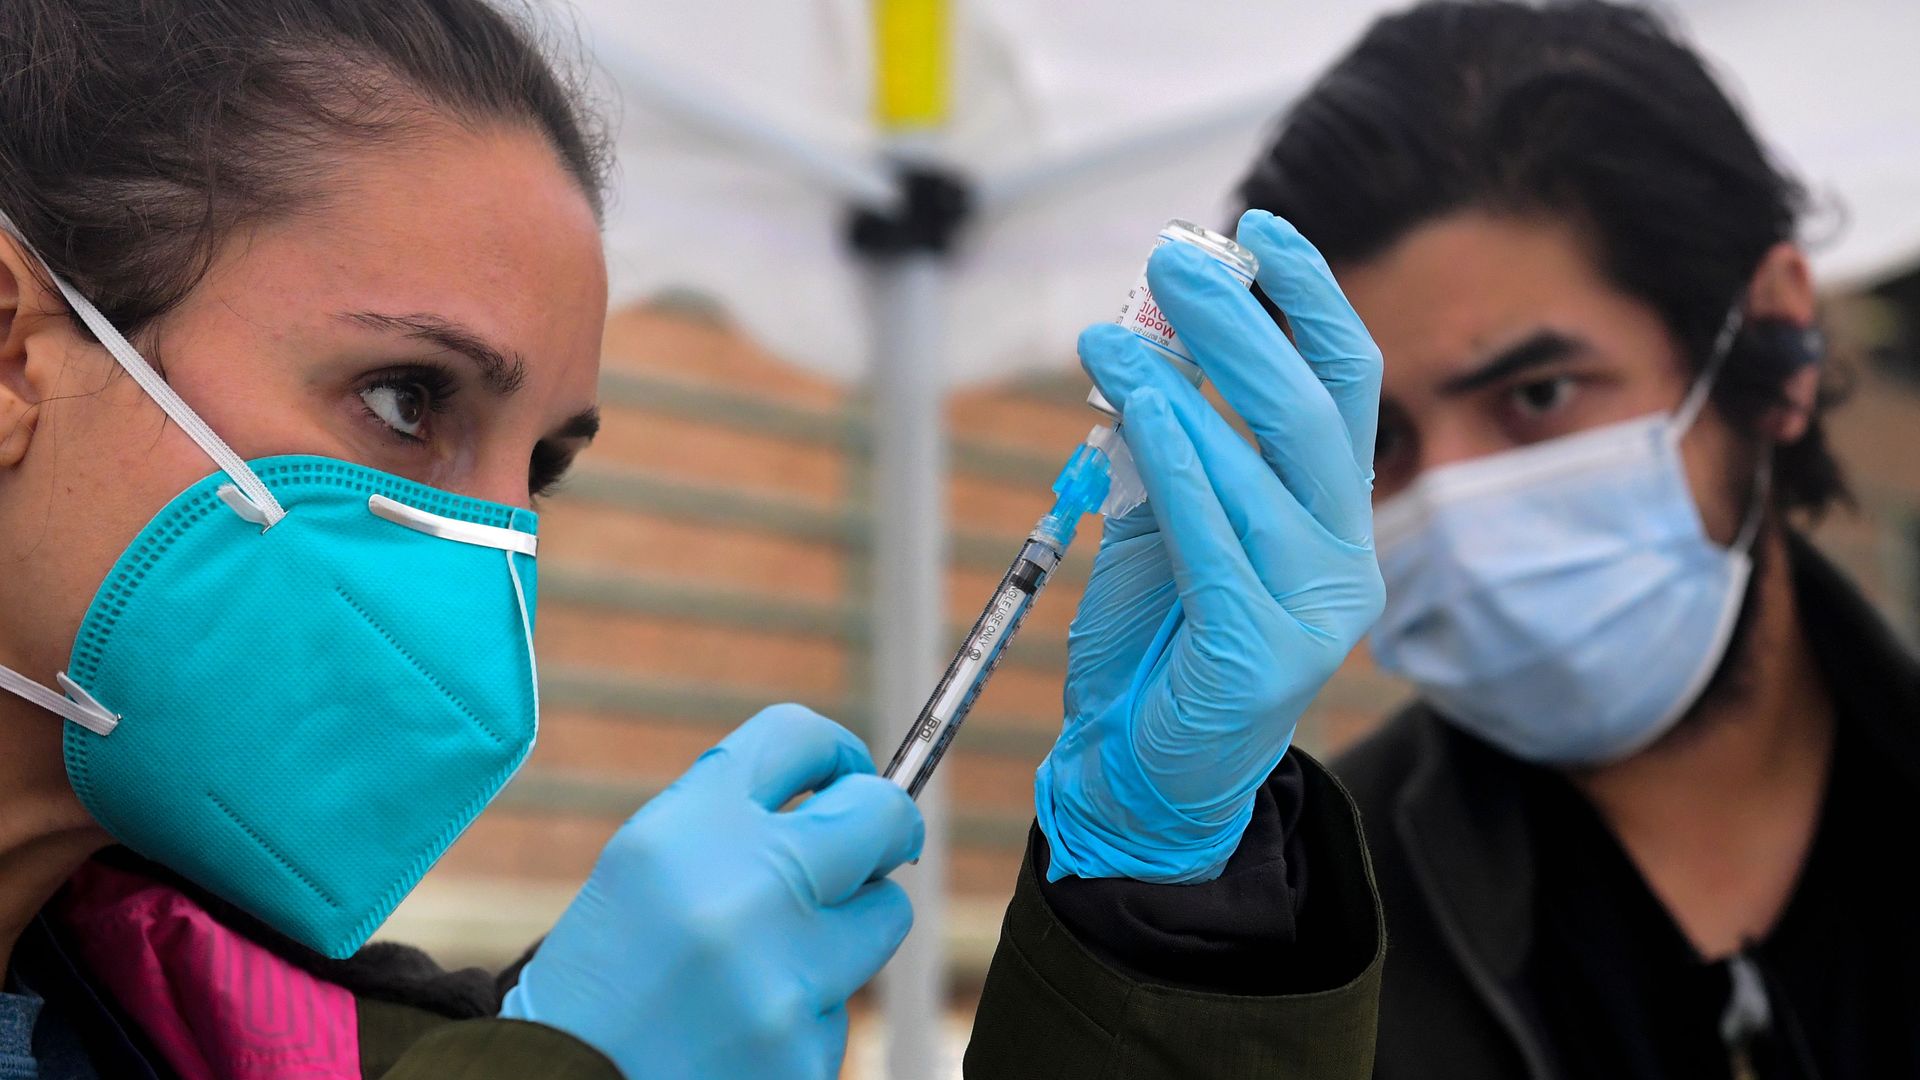 Photo of two masked people watching as one holds up a vaccine syringe